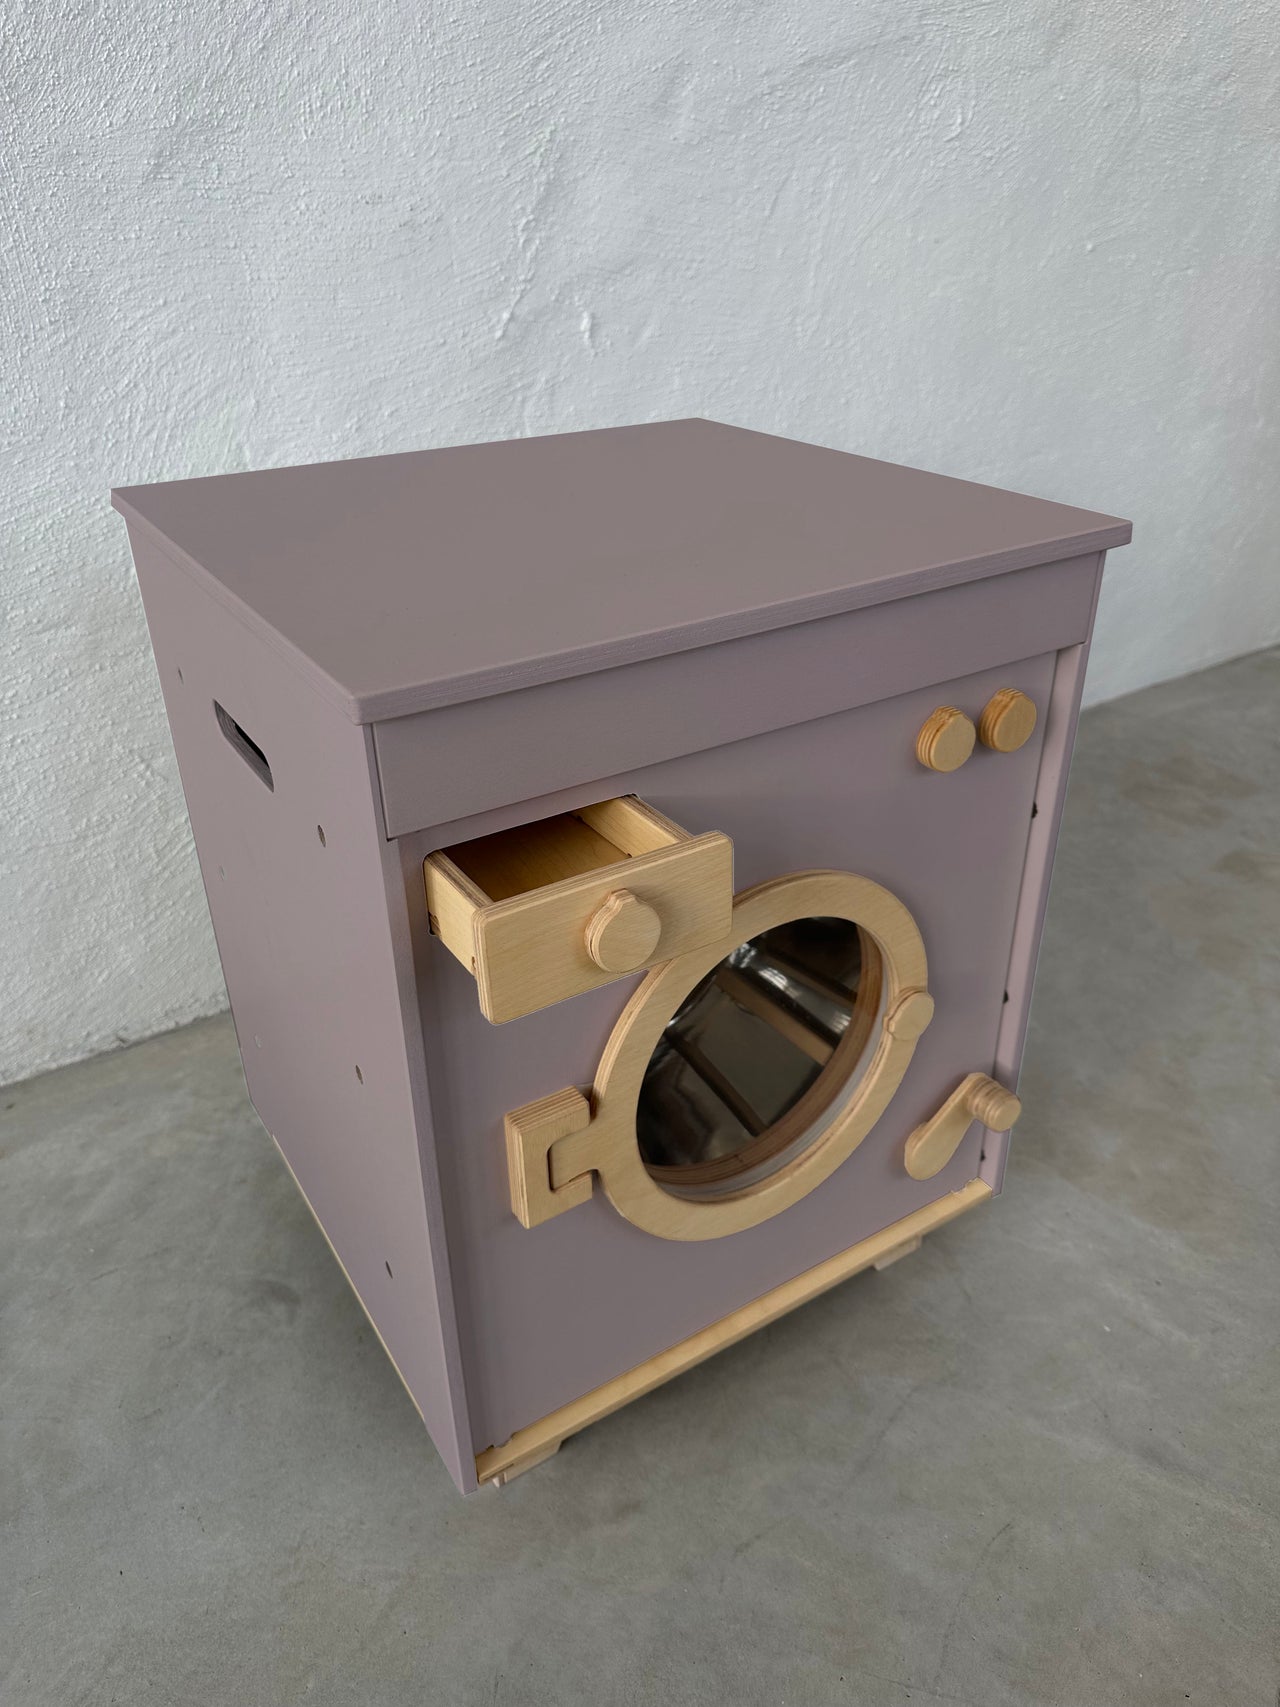 Wooden Washing Machine - White - MIDMINI - Handcrafted wooden toys for generations.